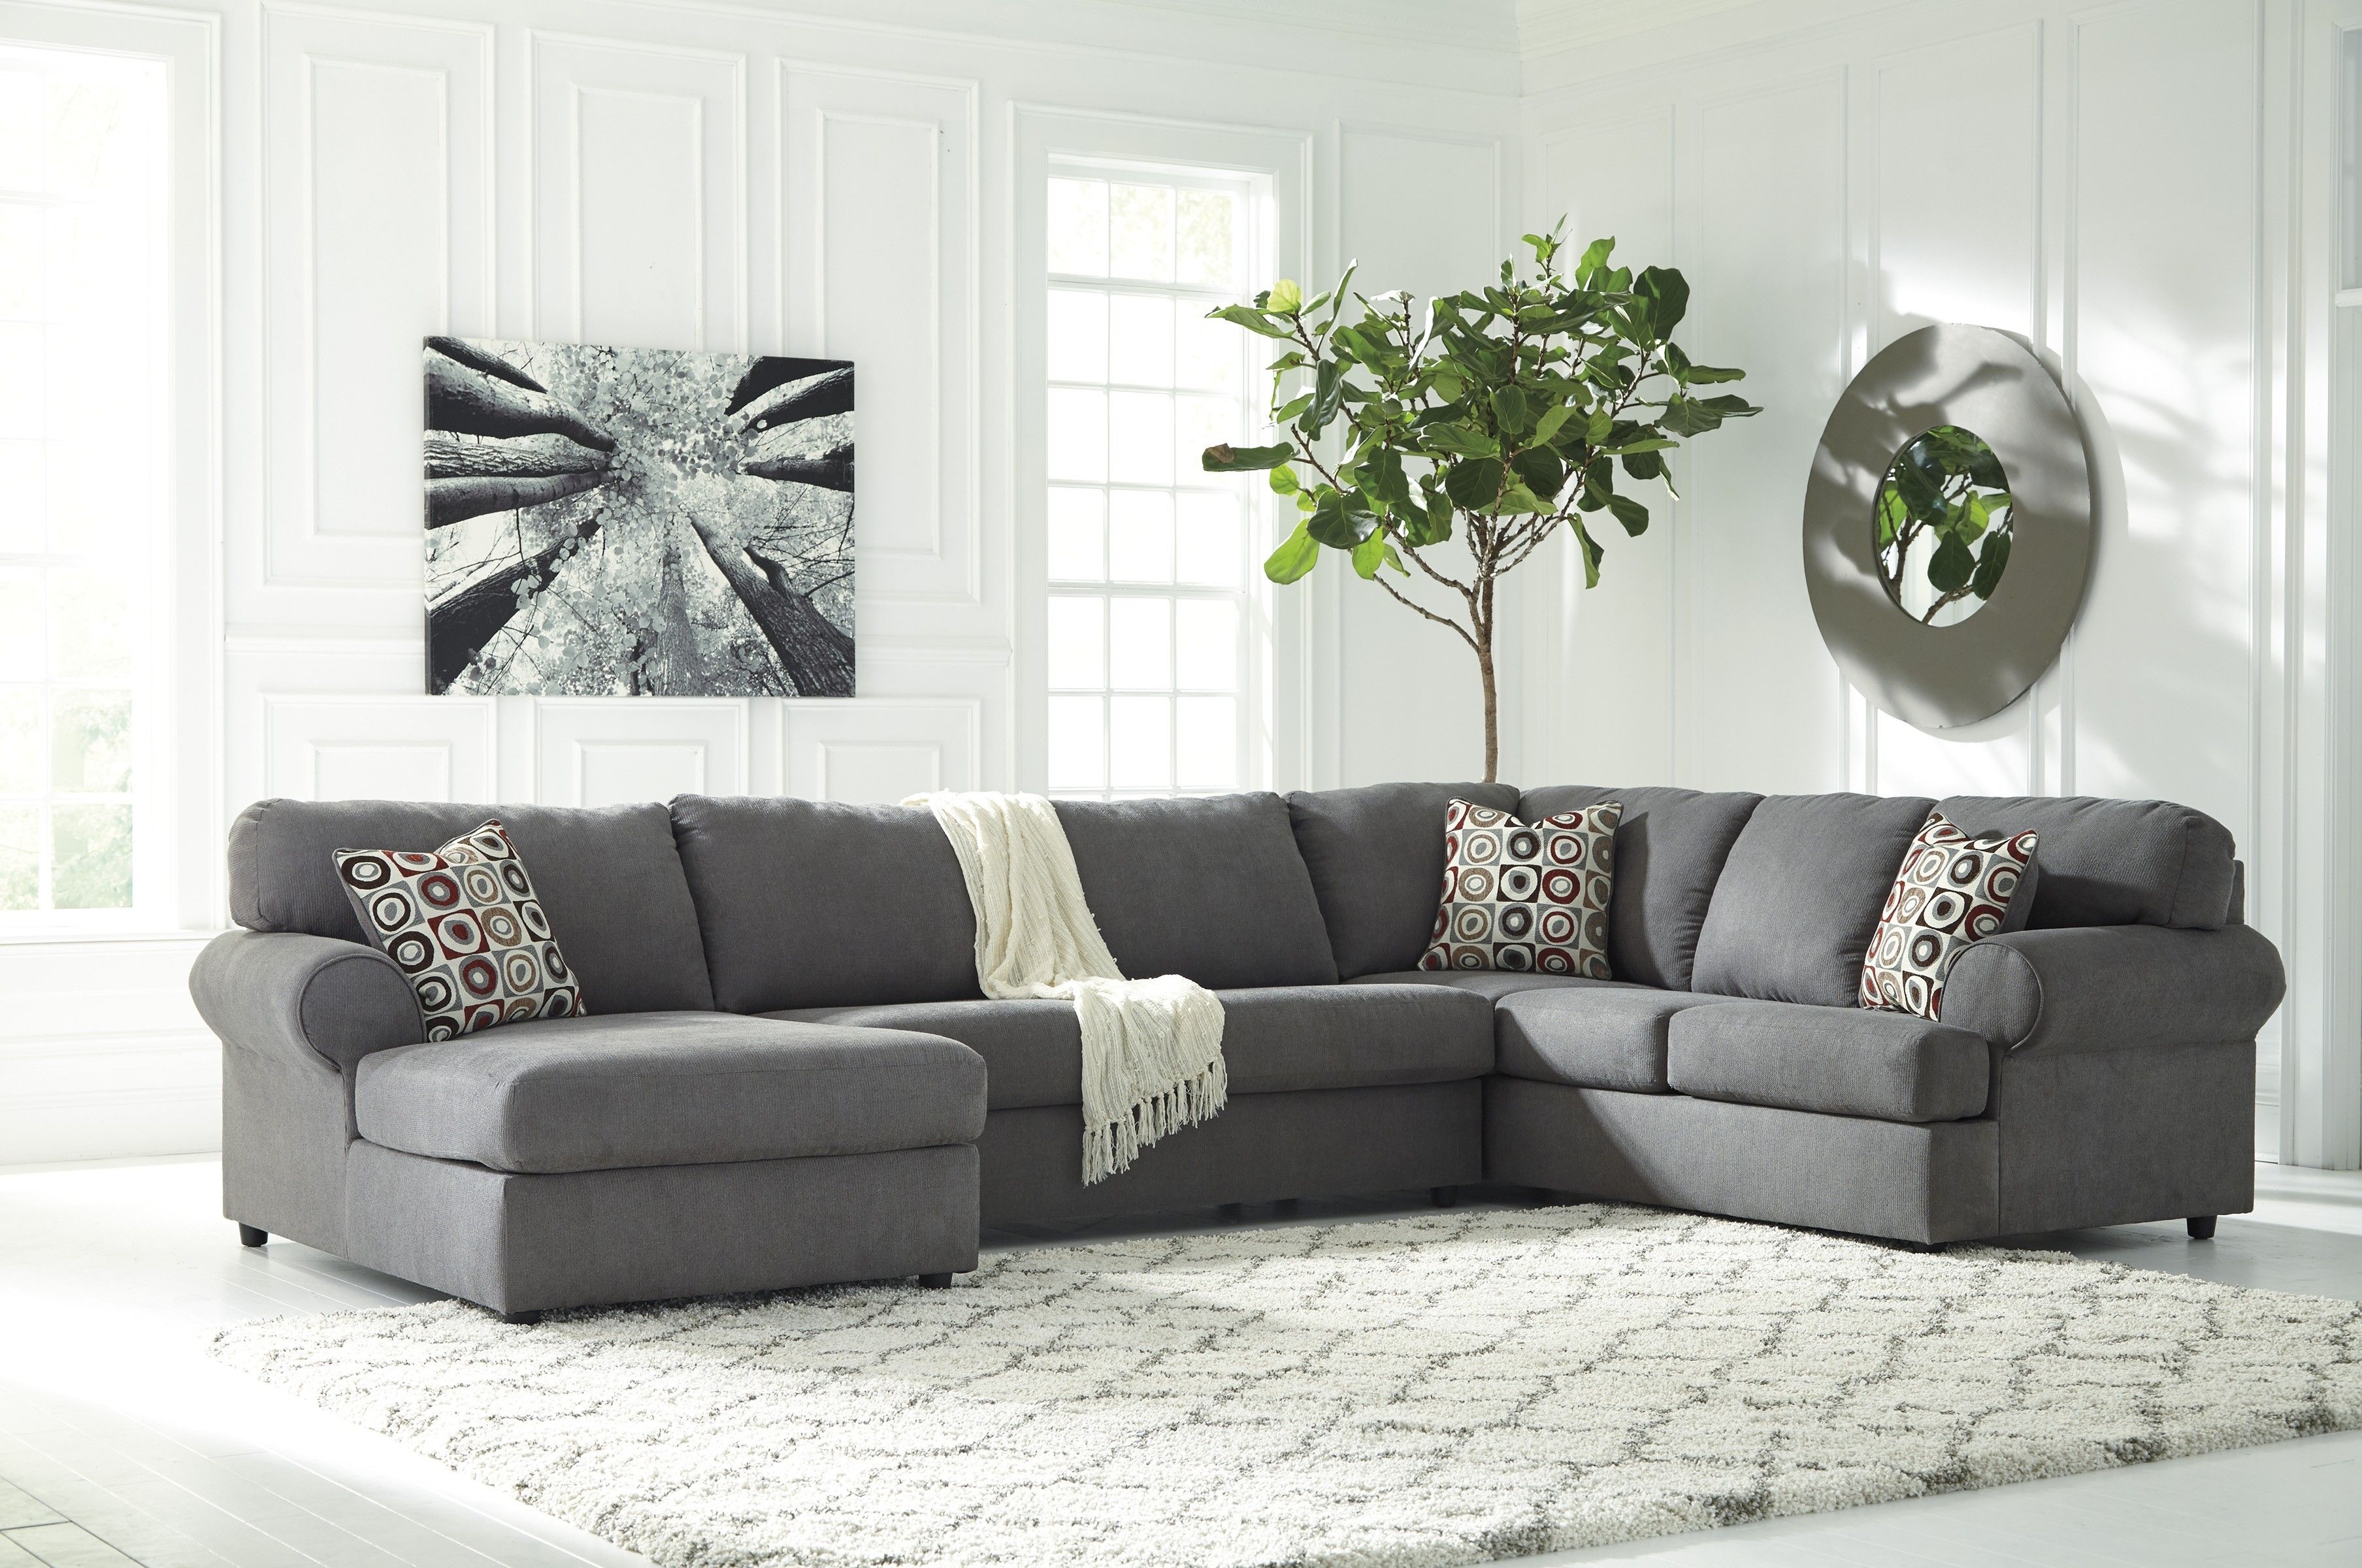 Jayceon Steel 64902 3 Pc Sectional Within Sierra Foam Ii 3 Piece Sectionals (View 21 of 30)